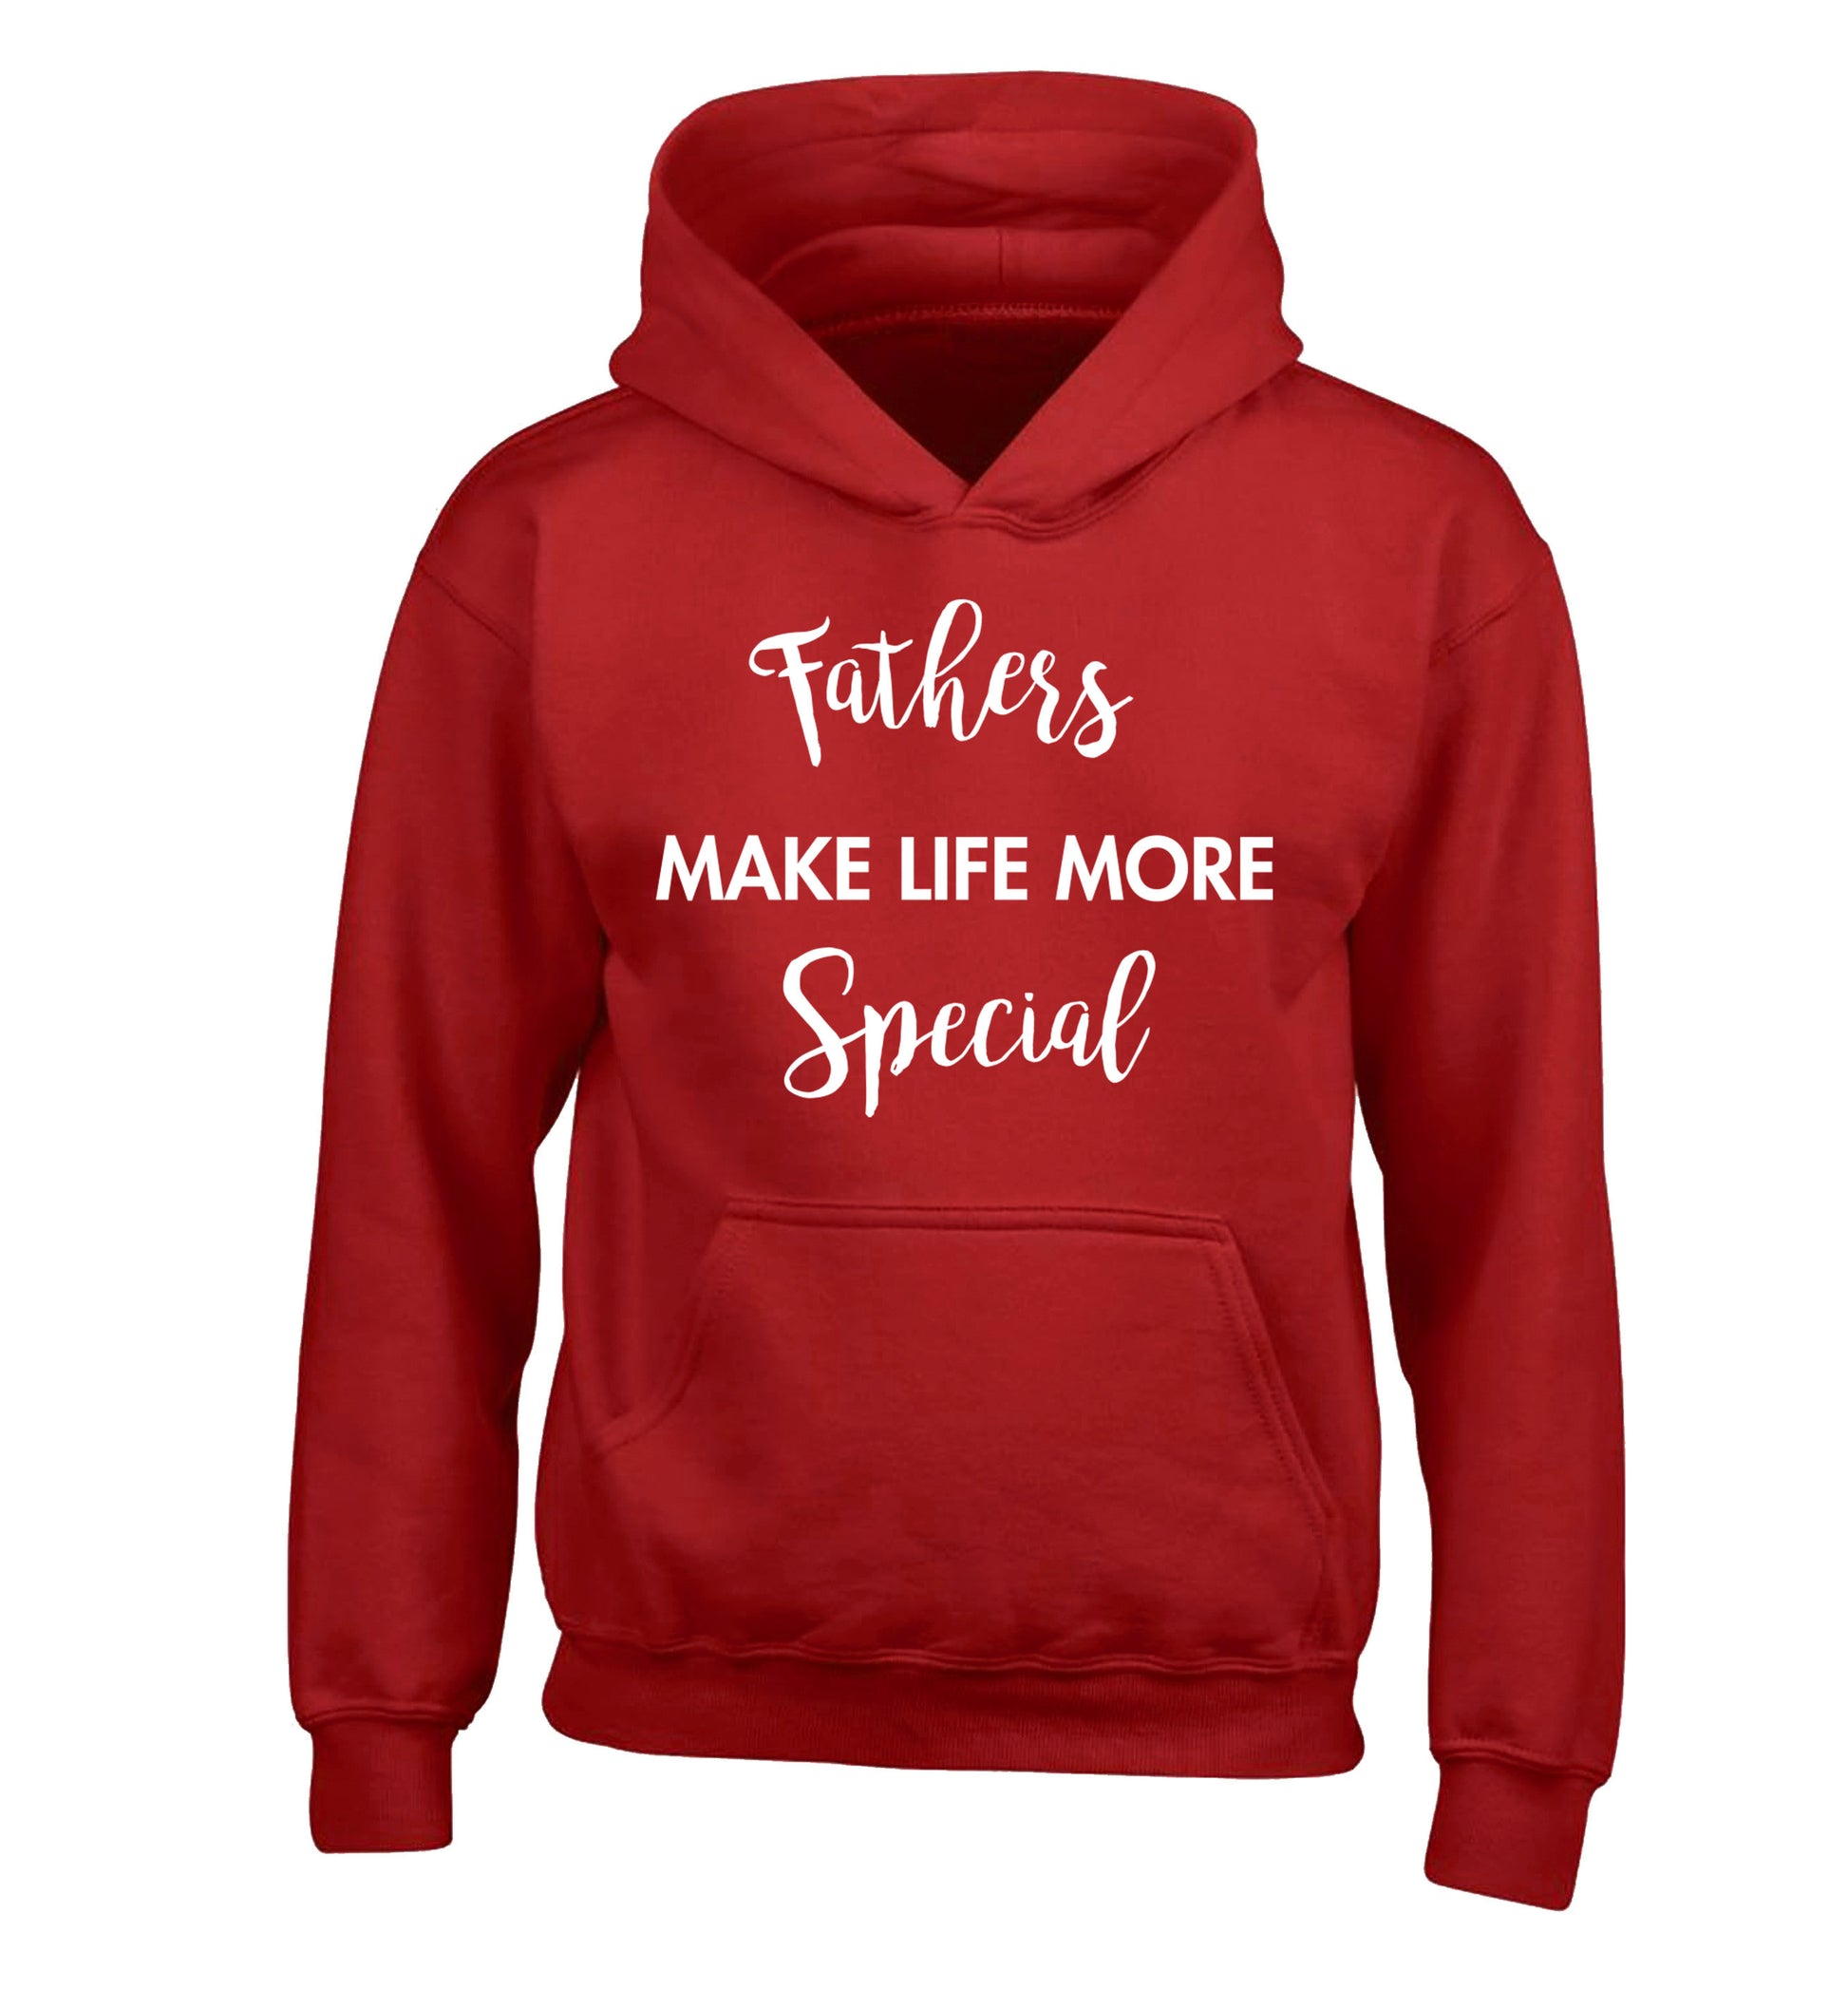 Fathers make life more special children's red hoodie 12-14 Years